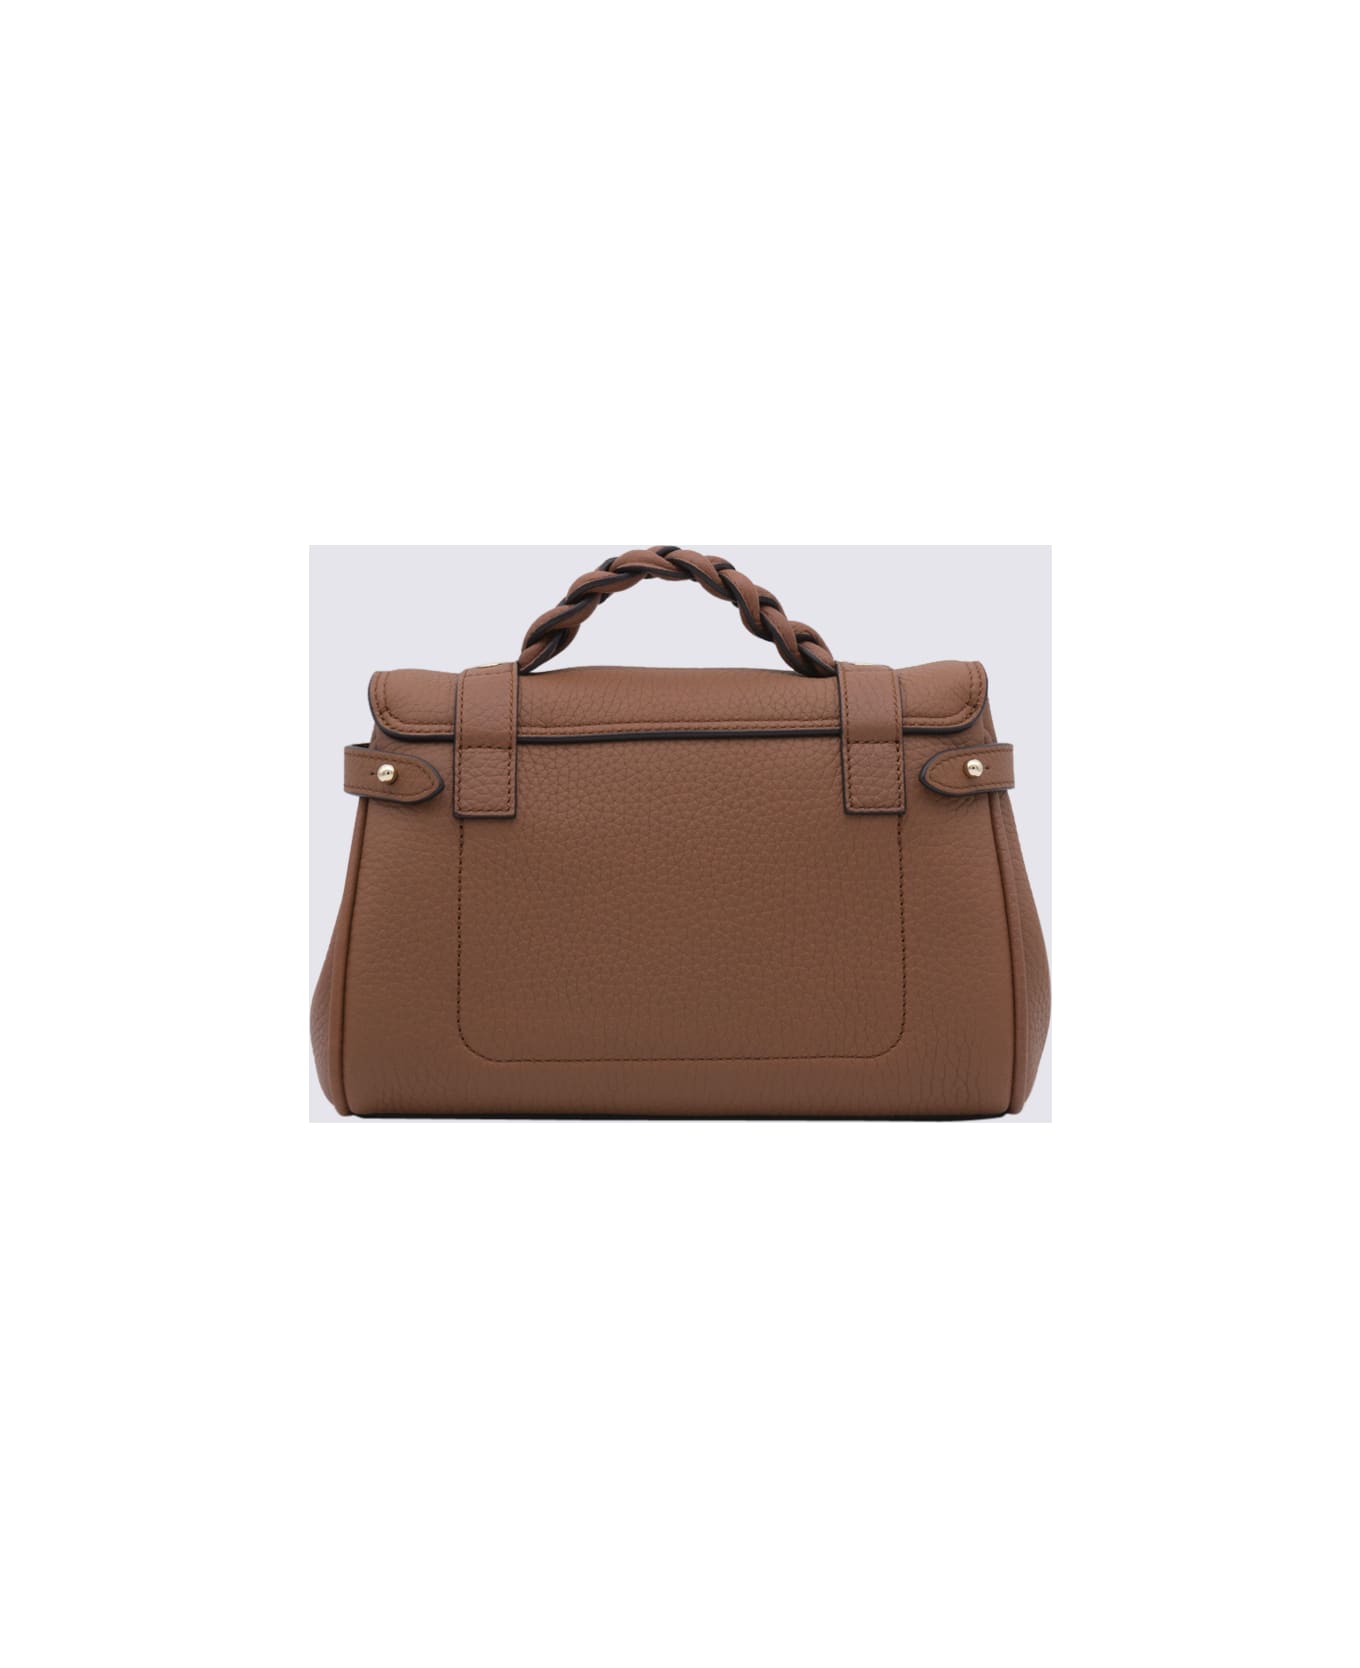 Mulberry Brown Leather Alexa Tote Bag - Chestnut